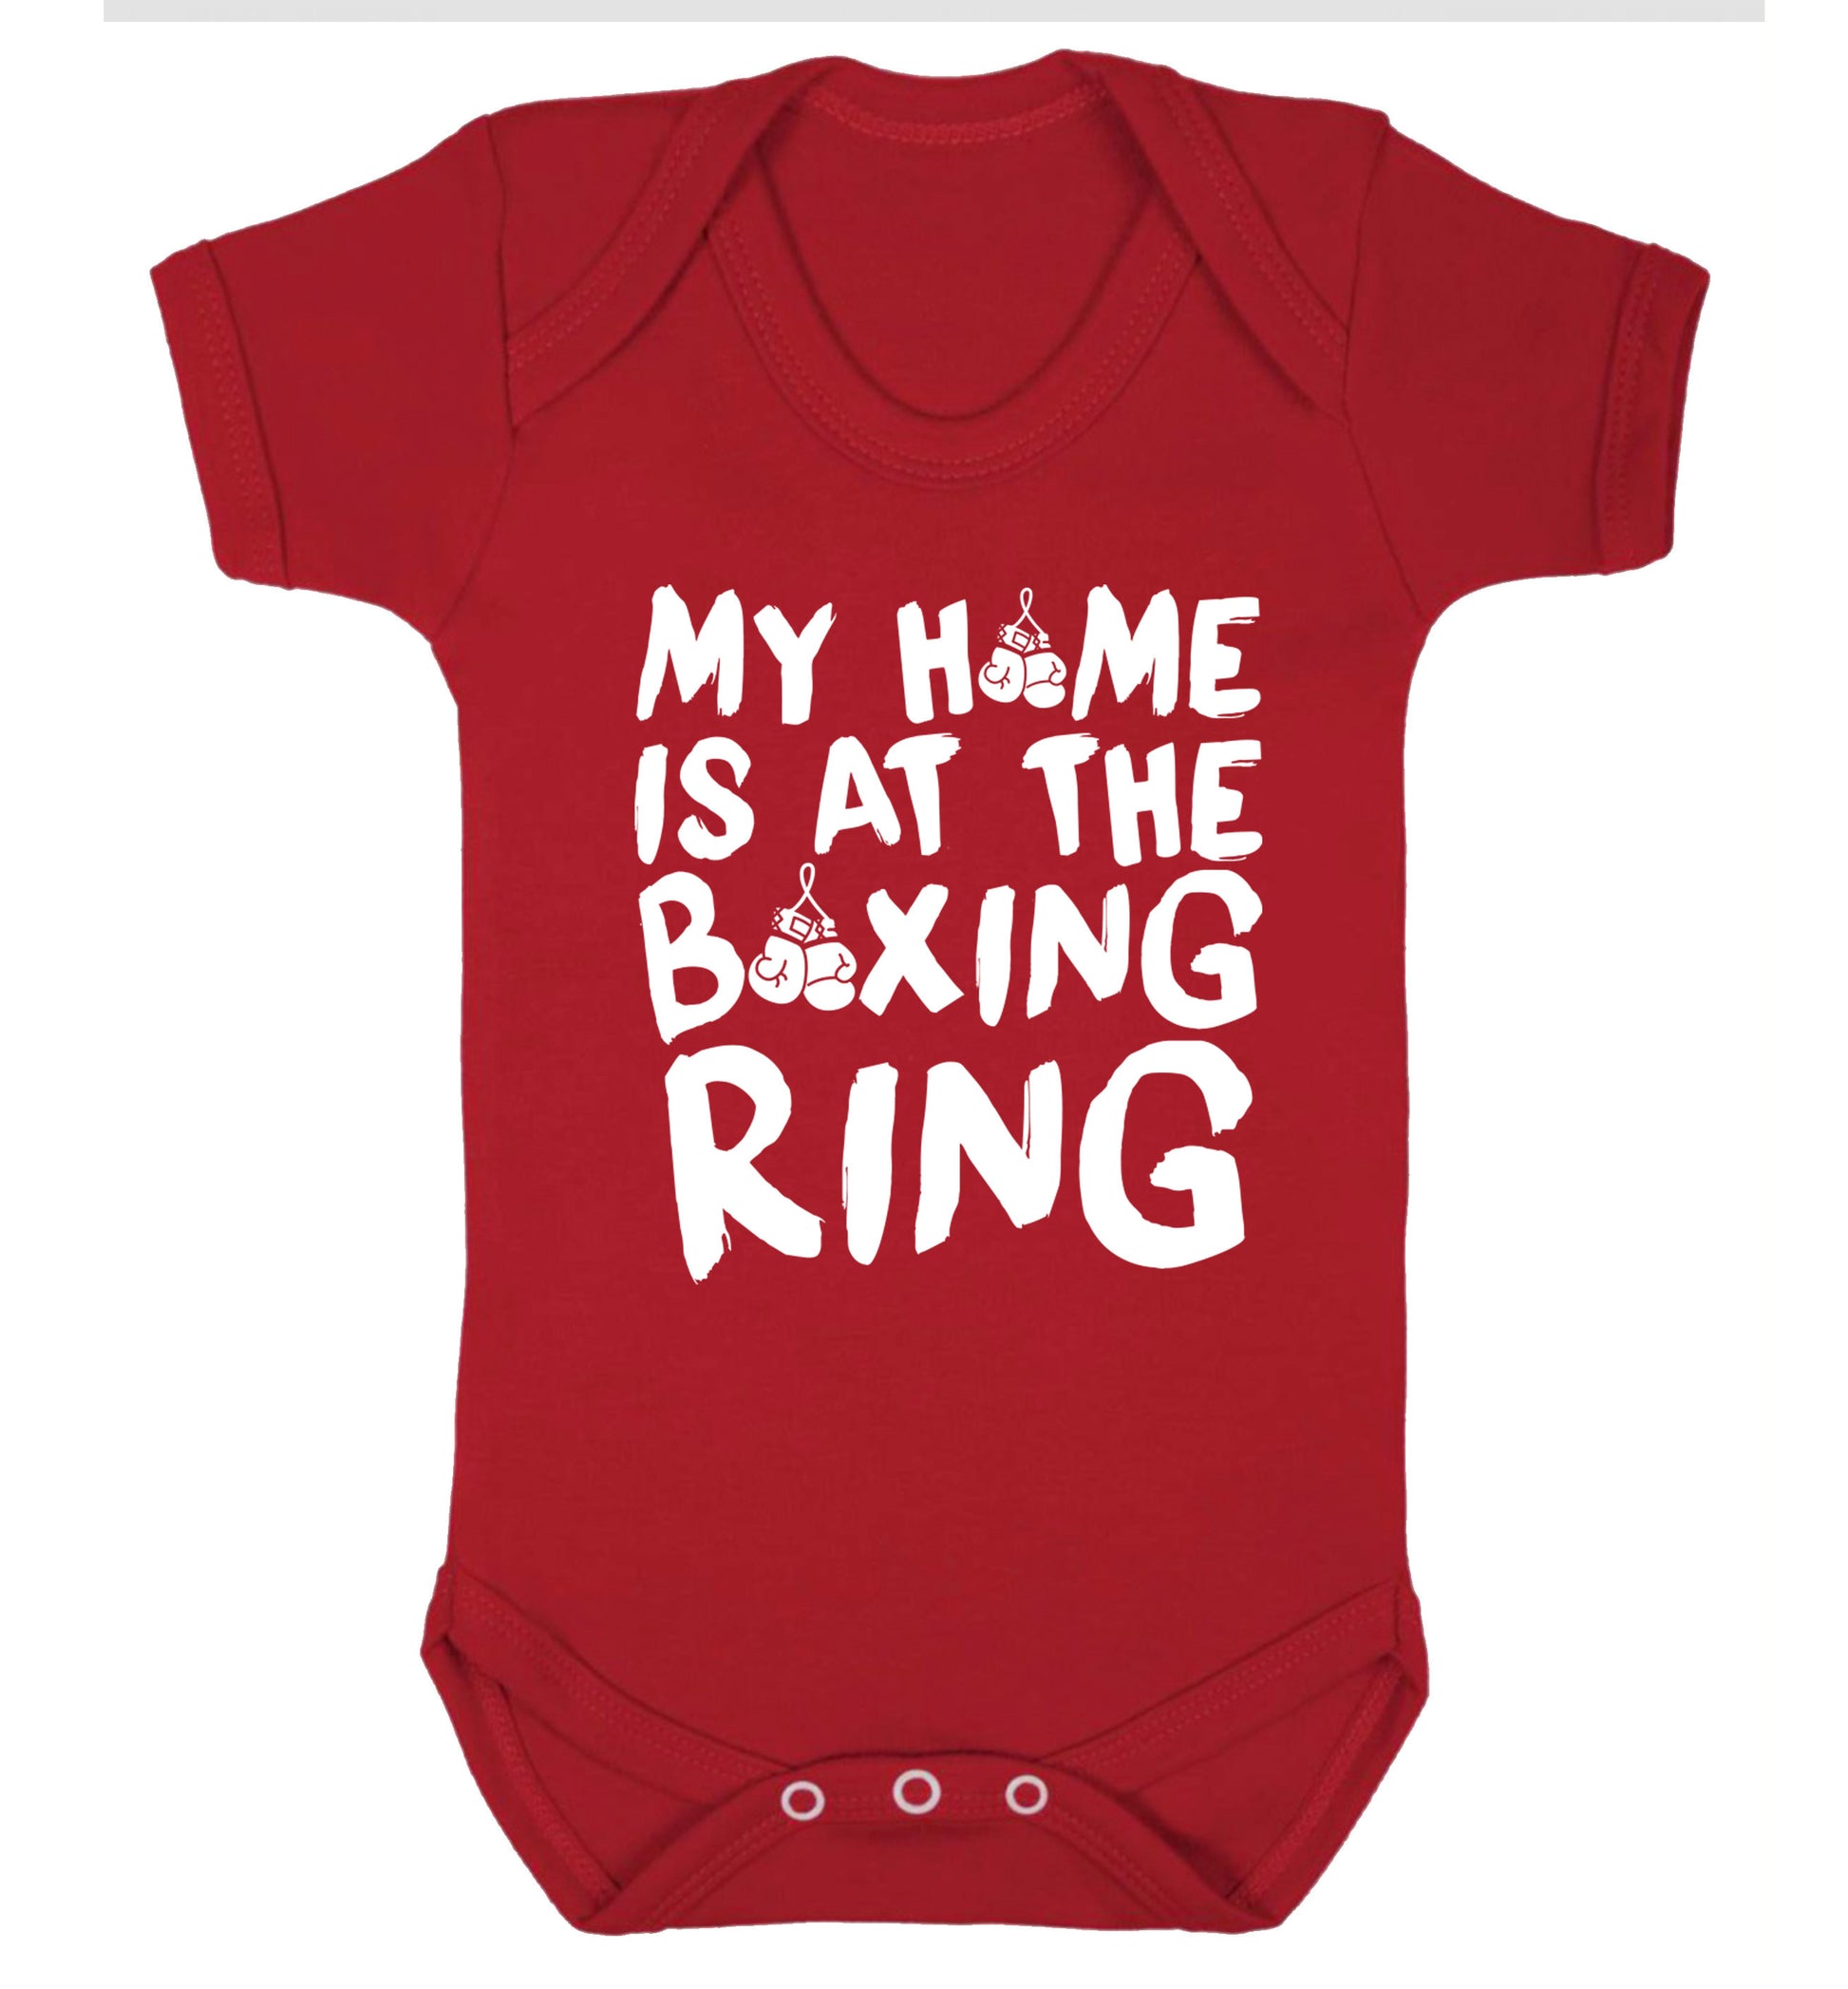 My home is at the boxing ring Baby Vest red 18-24 months